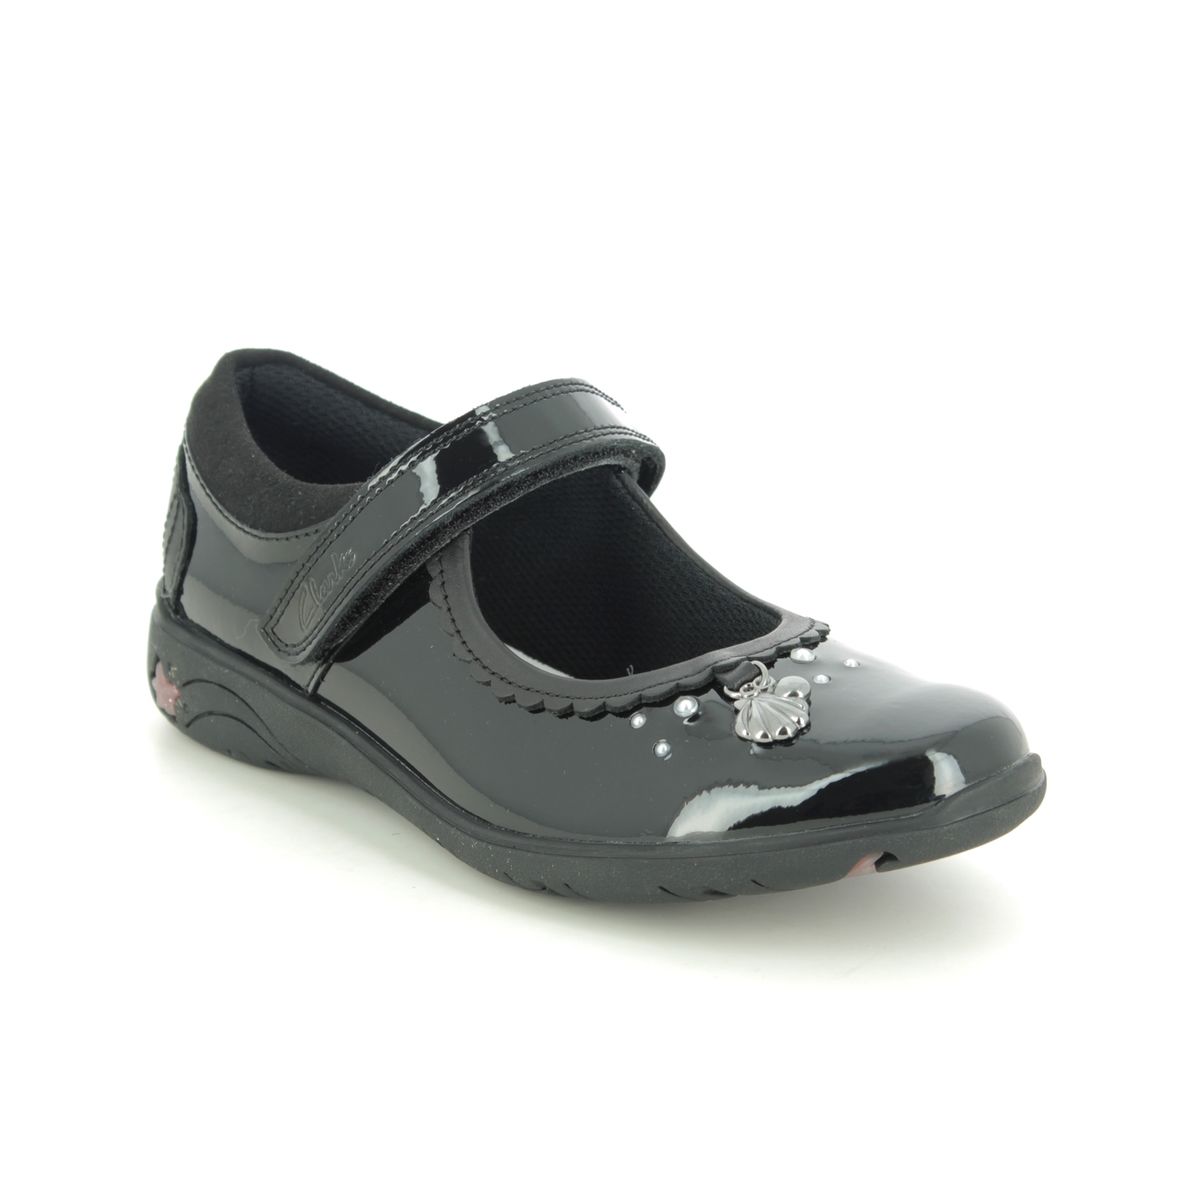 Clarks Sea Shimmer K Black patent Kids girls school shoes 5554-38H in a Plain Leather in Size 2